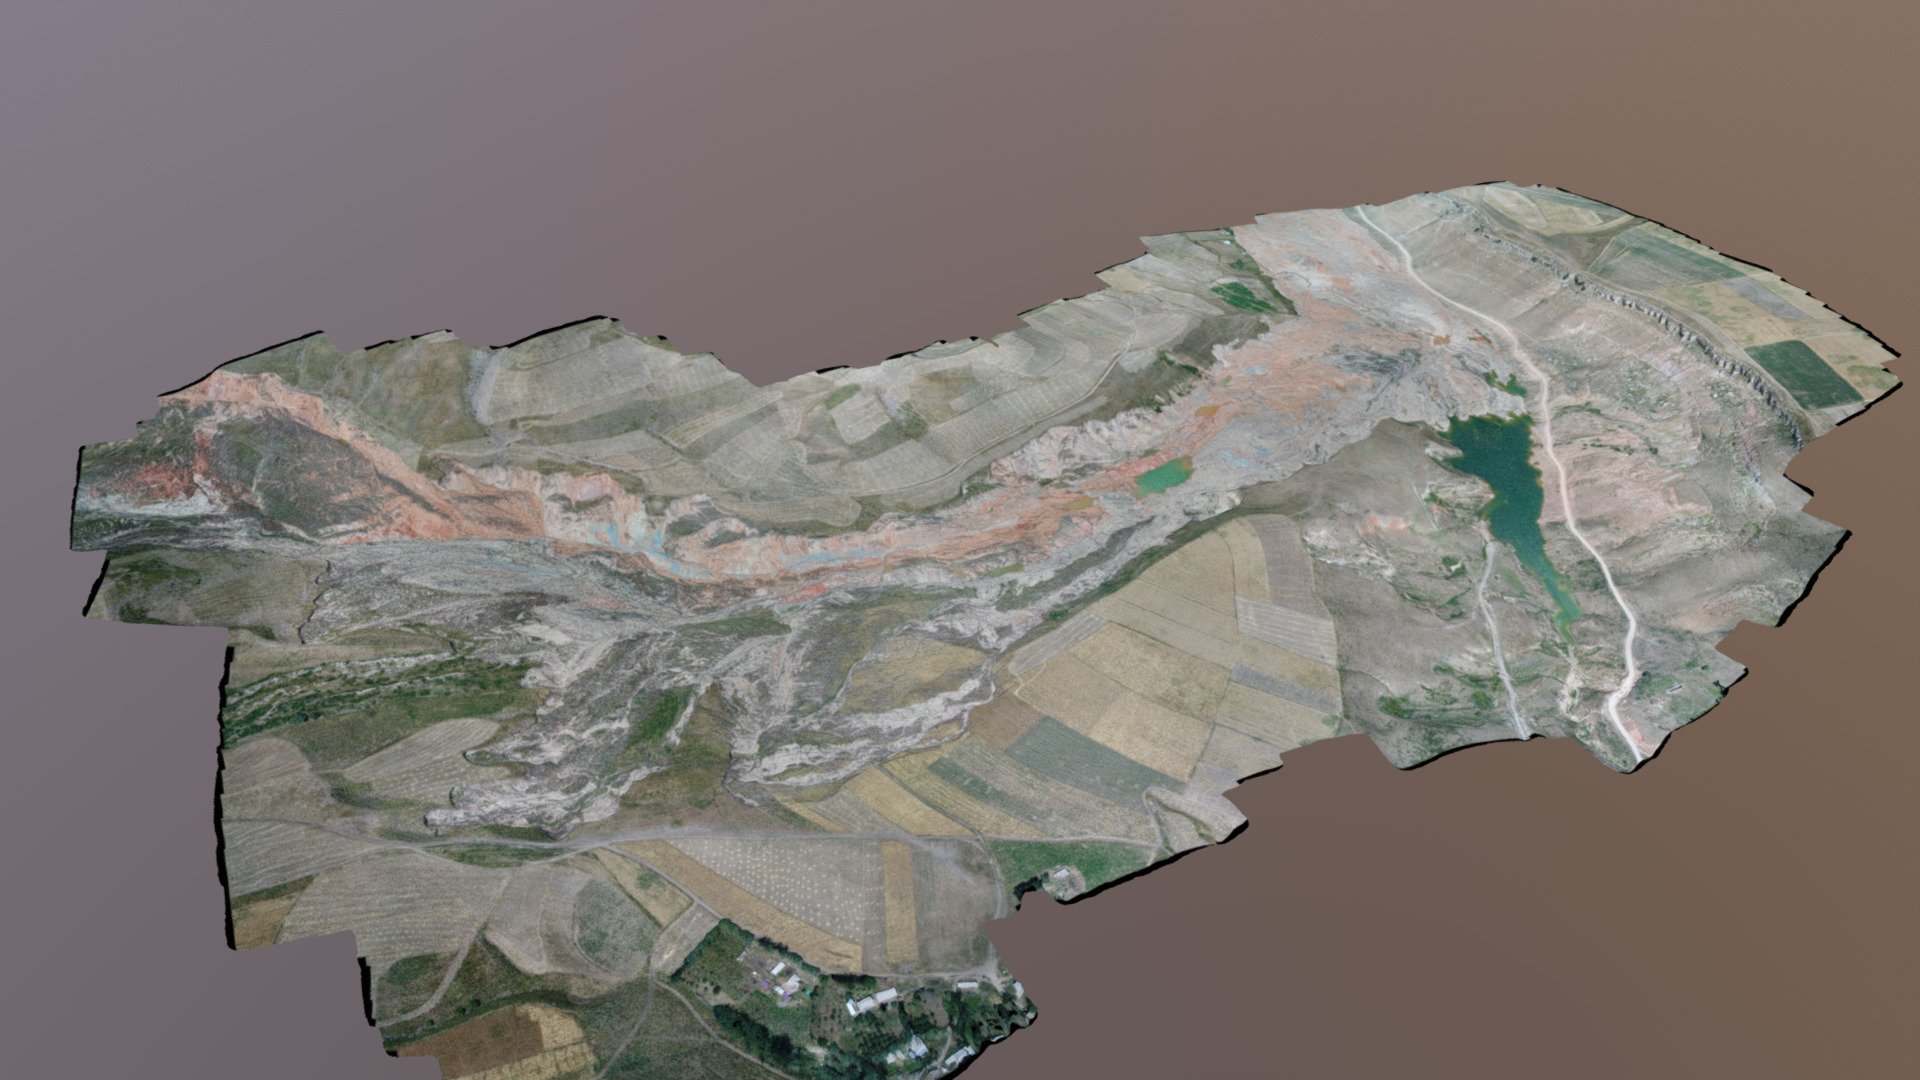 Landslides 3D models using DJI phantom 3/4 pro during two fieldcampaigns in 2016 and 2017 in Kyrgyzstan, Central Asia.
contact: behling@gfz-potsdam.de
https://www.gfz-potsdam.de/en/staff/robert-behling/sec14/ - KurbuTash_transitionZone - 3D model by sec14gfz 3d model